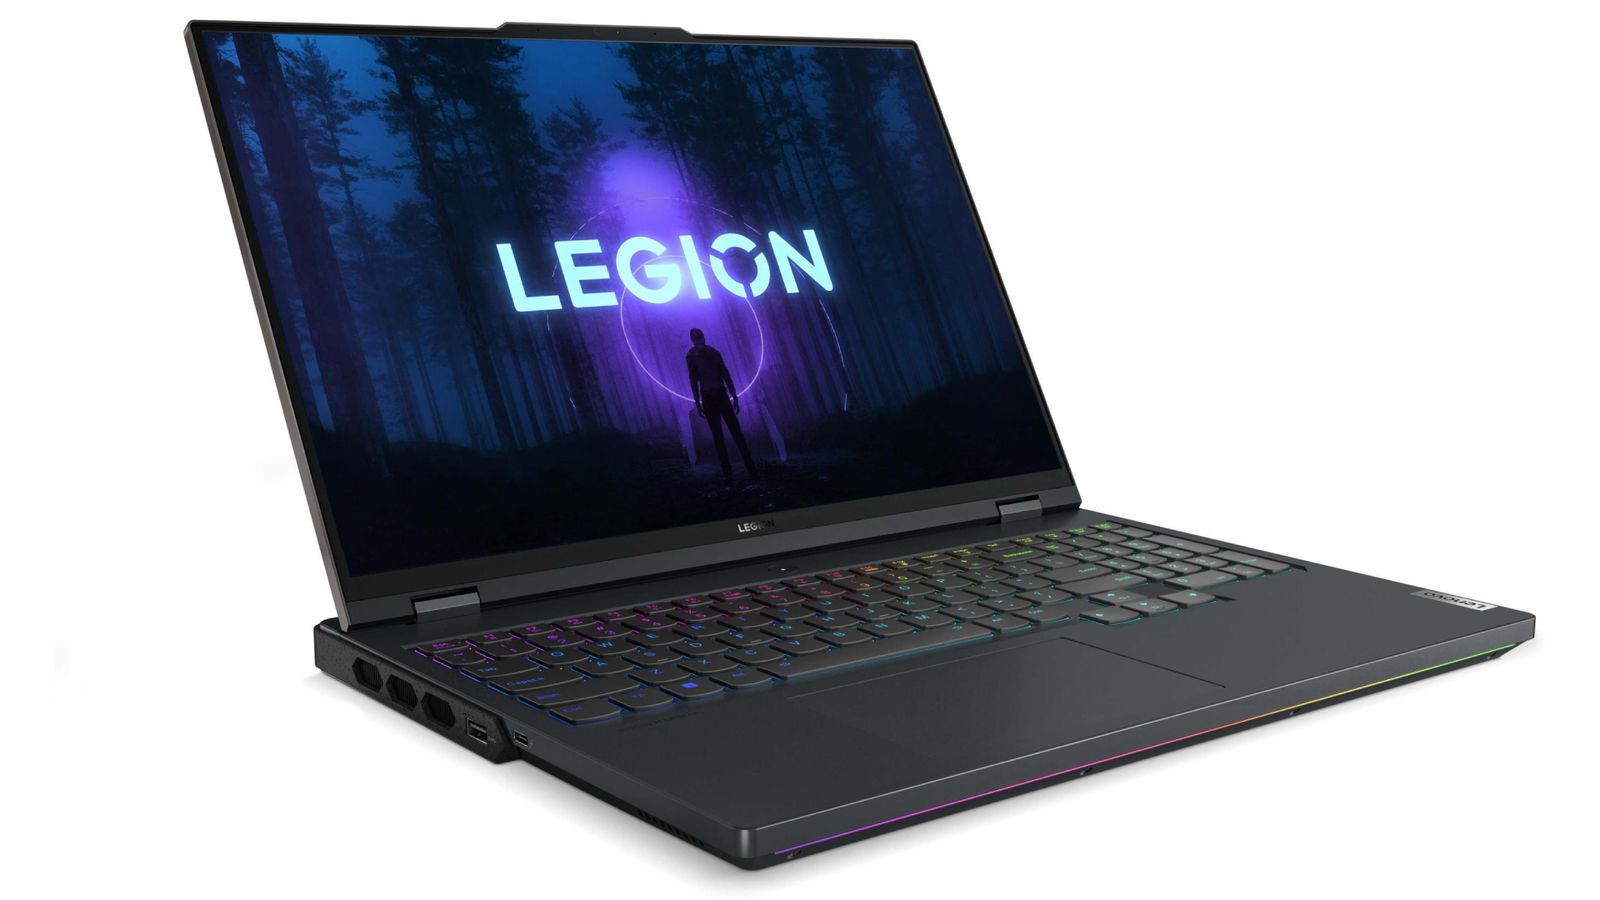 Best Lenovo gaming laptop - Lenovo Legion 7i product image of a black laptop with Legion branding on the display in front of a dark forest scene in the background,